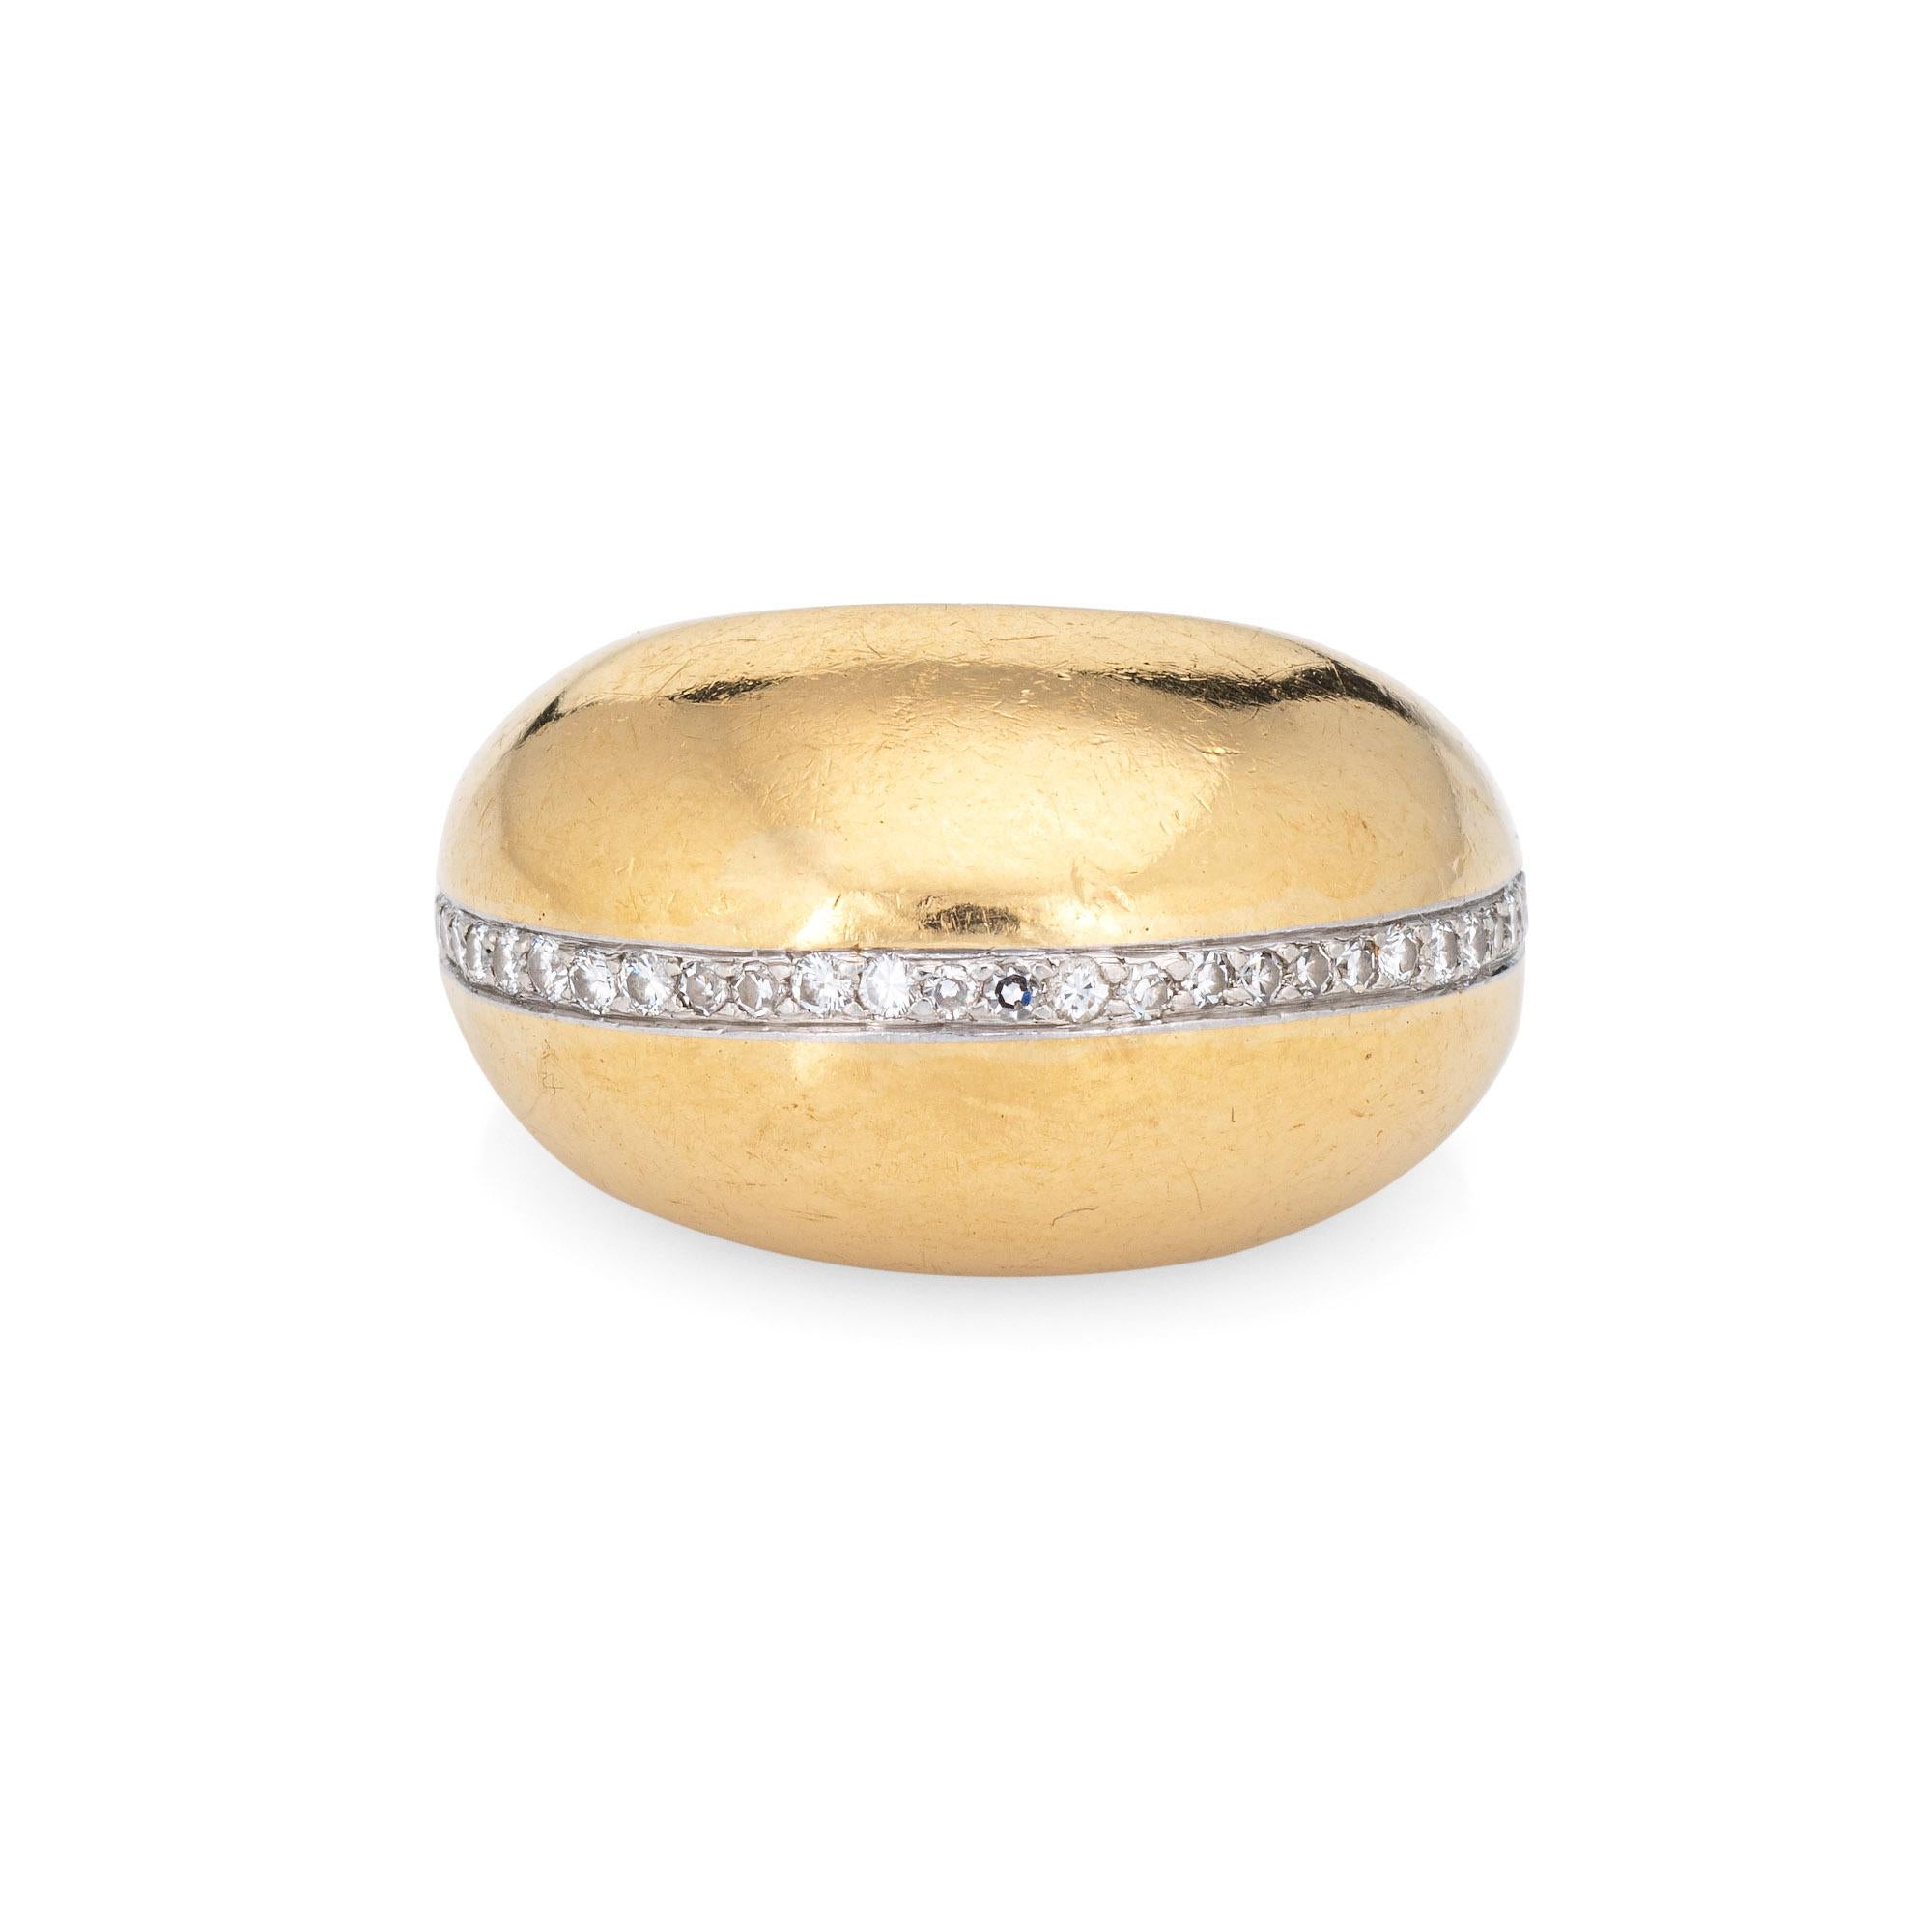 Rare vintage Tiffany & Co diamond dome ring designed by Paloma Picasso, crafted in 18 karat yellow gold & platinum (circa 1980).  

33 round brilliant & single cut diamonds total an estimated 0.33 carats (estimated at G-H color and VS2-SI1